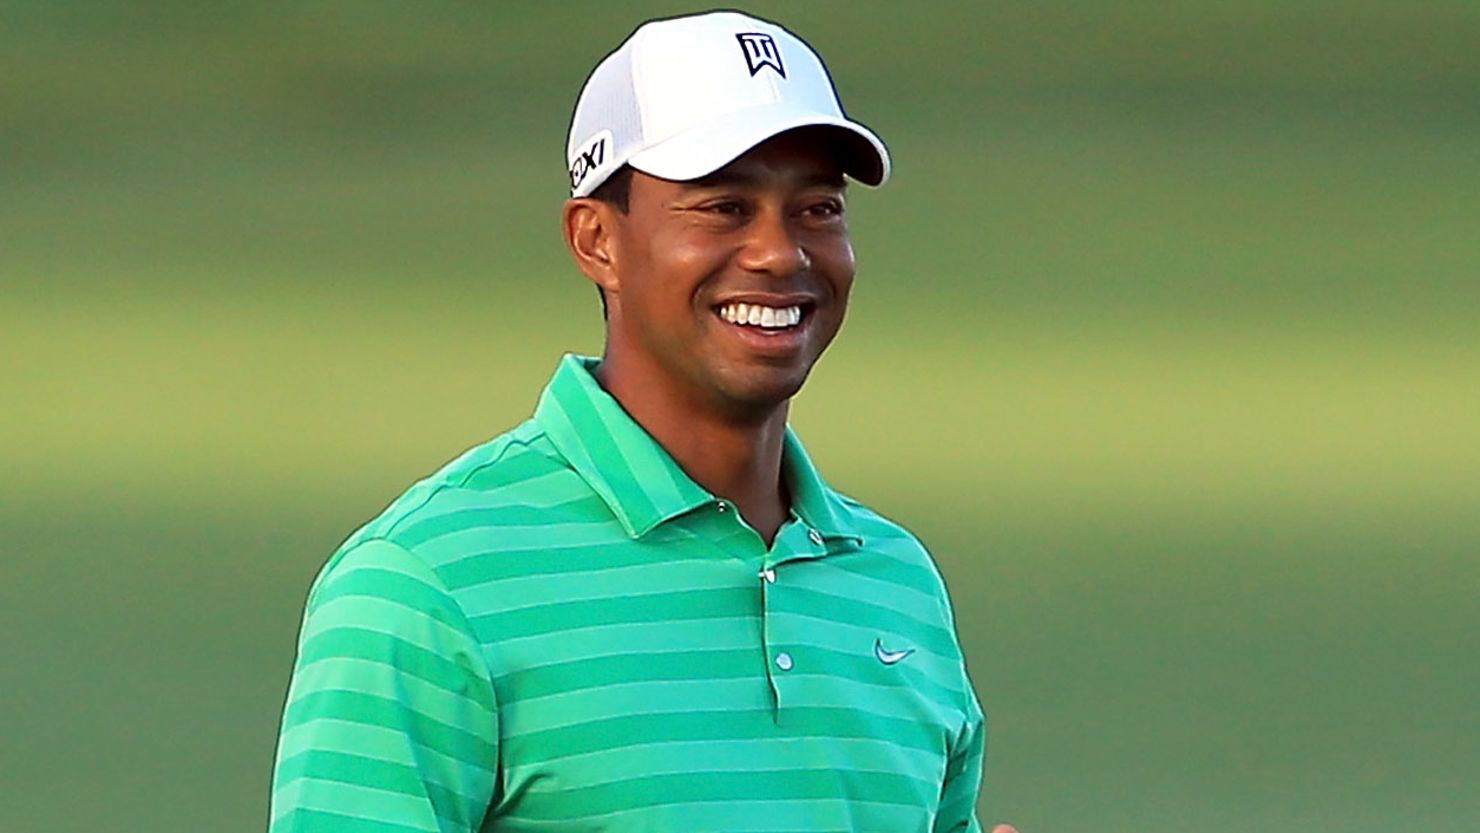 Woods was all smiles after an opening round three-under-par 69 at the Arnold Palmer Invitational at Bay Hill.